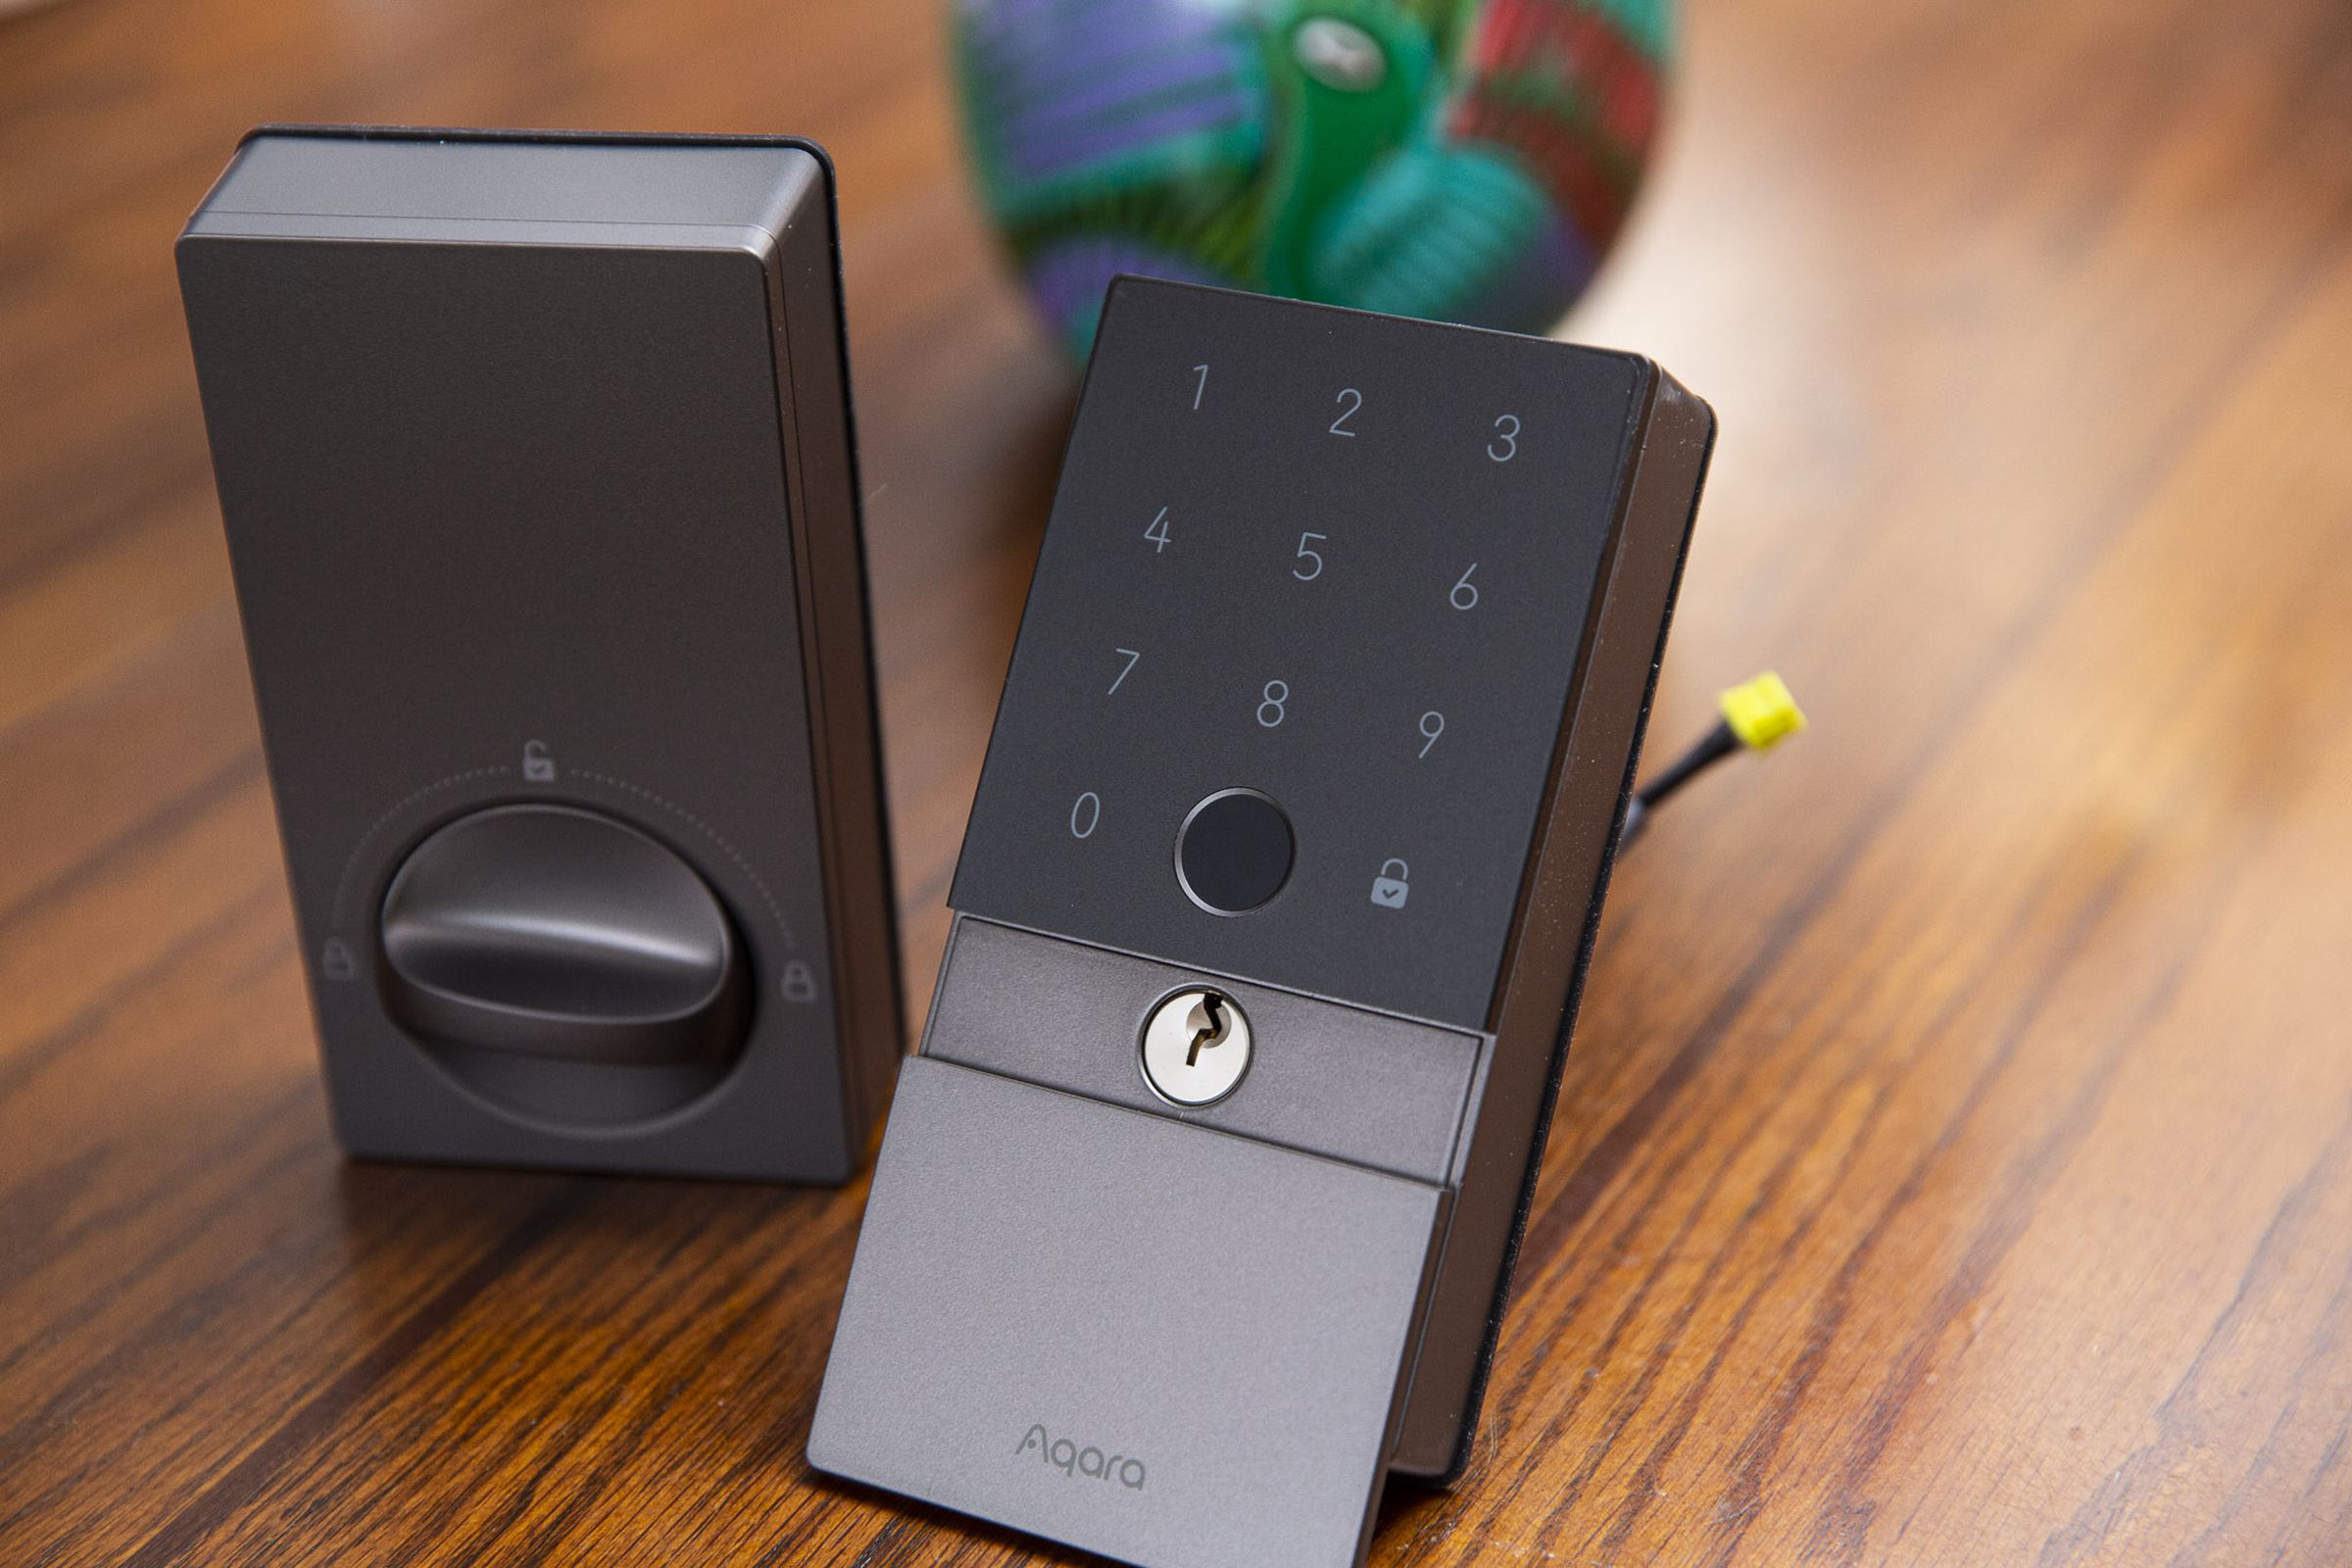 The two parts of the Aqara smart lock on a table.